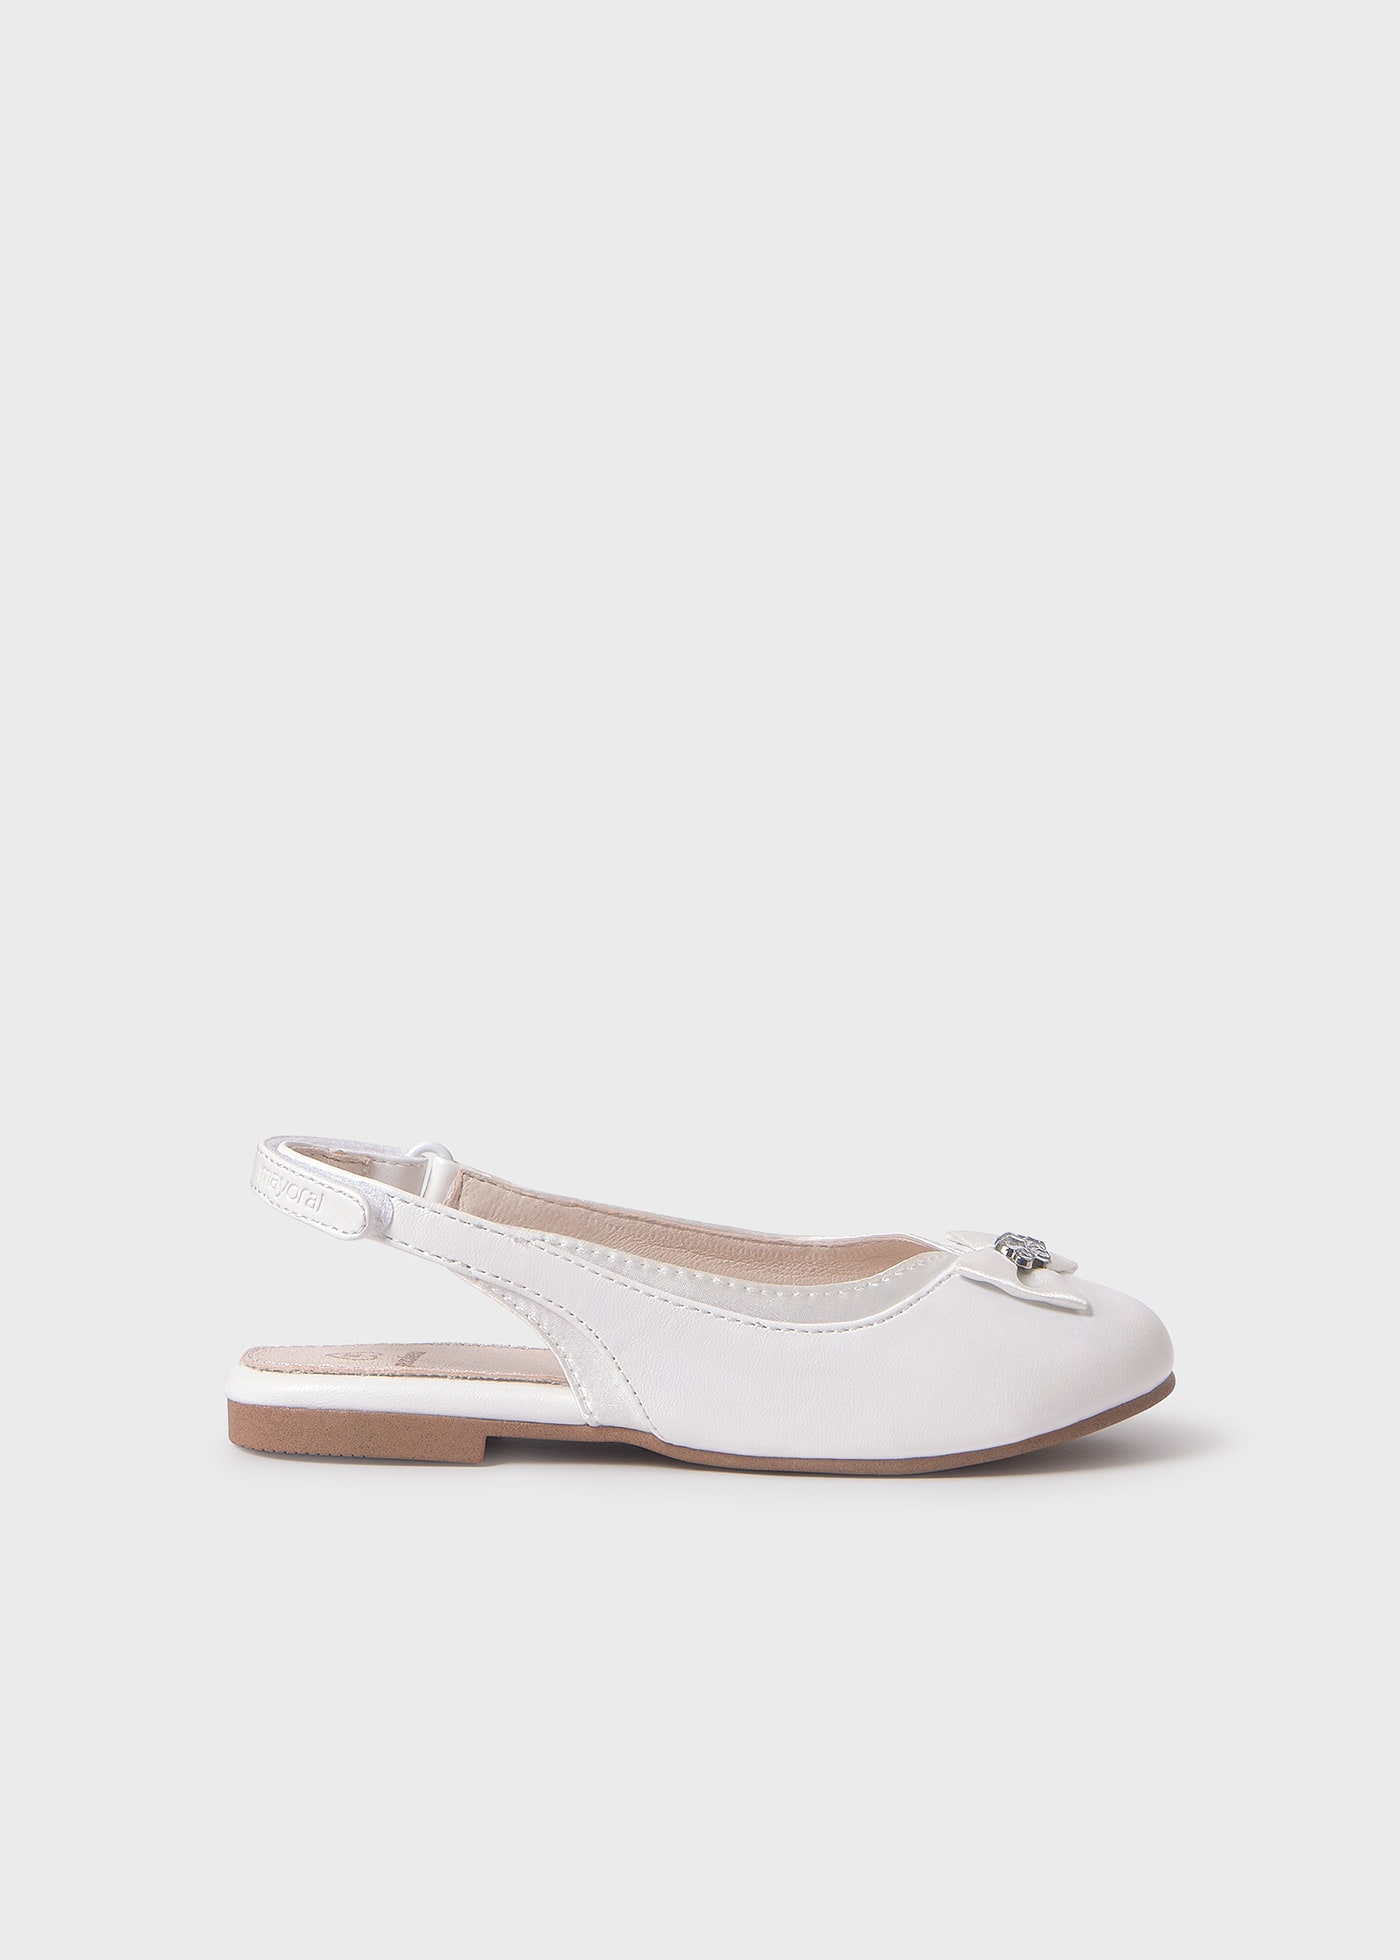 Girls ballet flat sustainable leather